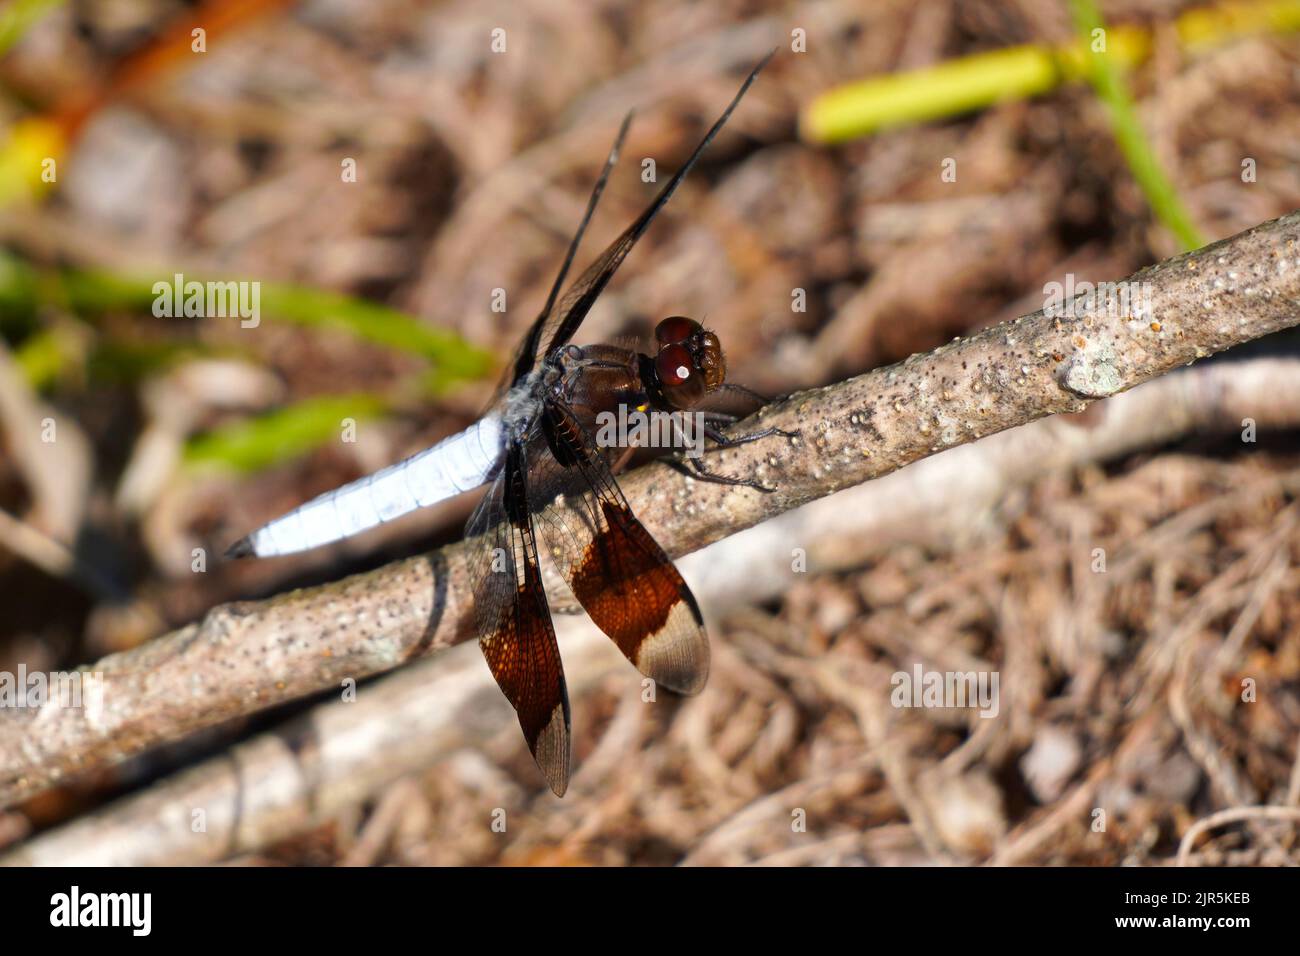 Male Common Whitetail Dragonfly, Plathemis lydia, perched on a stick Stock Photo